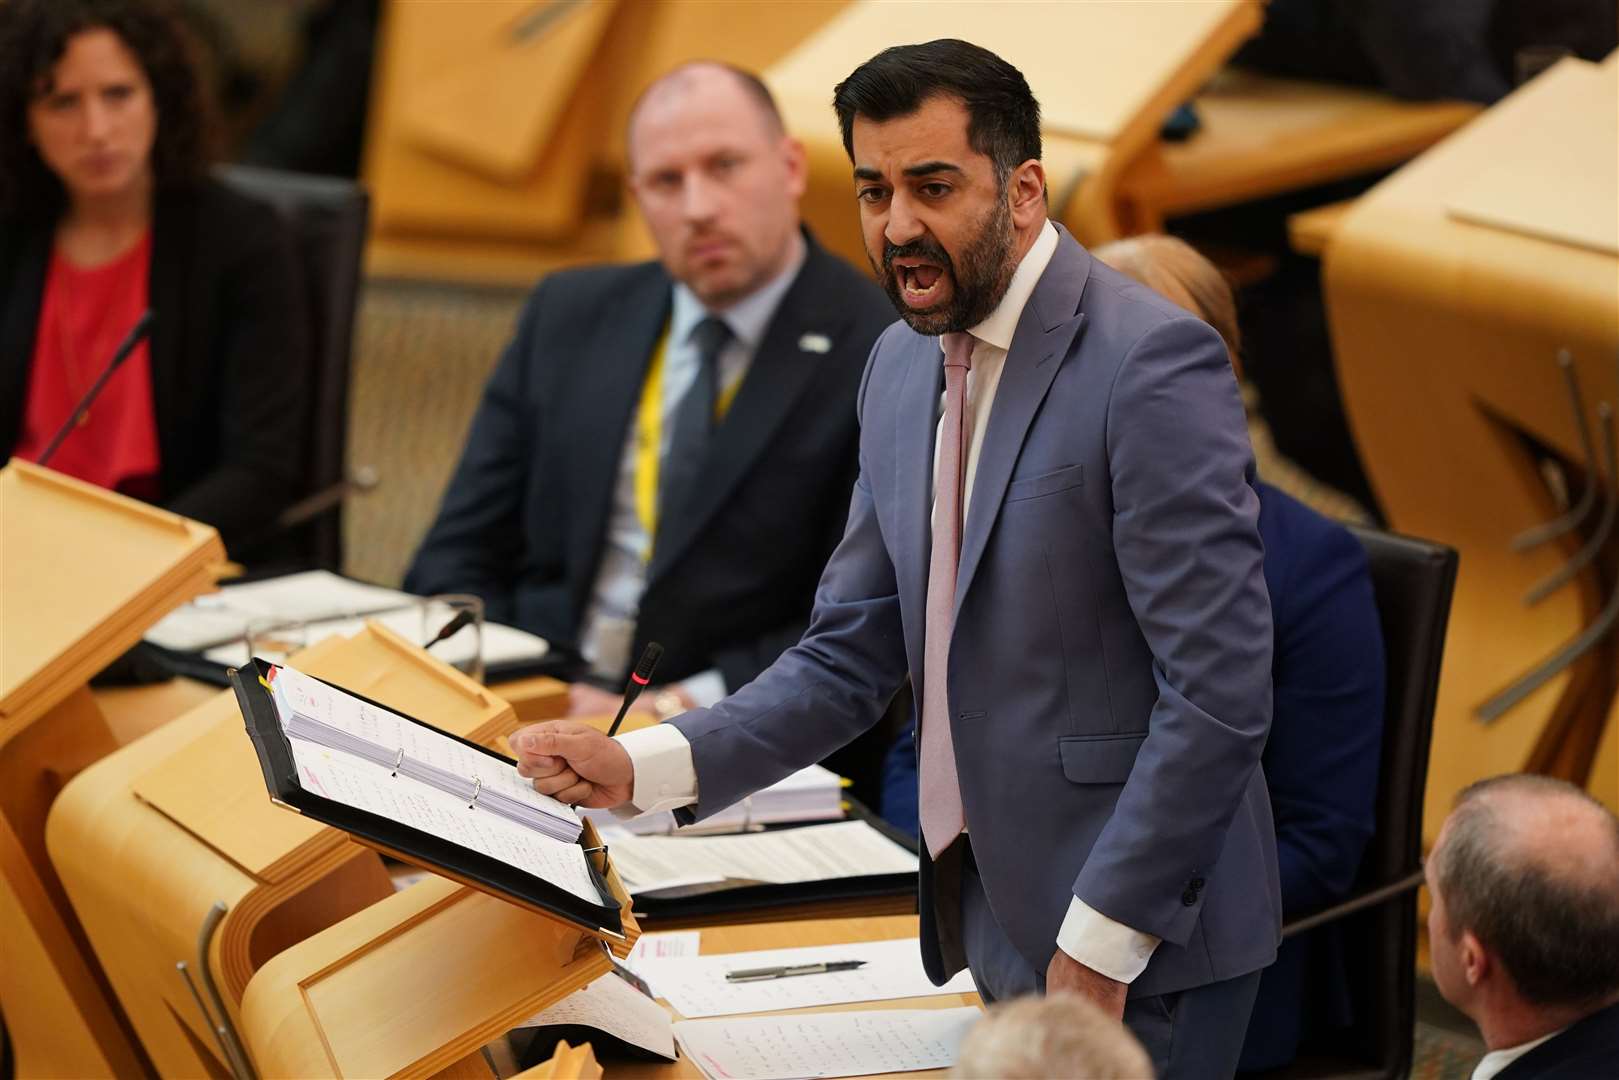 Humza Yousaf said a planned carbon capture and storage project in Aberdeenshire had been ‘relegated’ by the UK Government (PA)